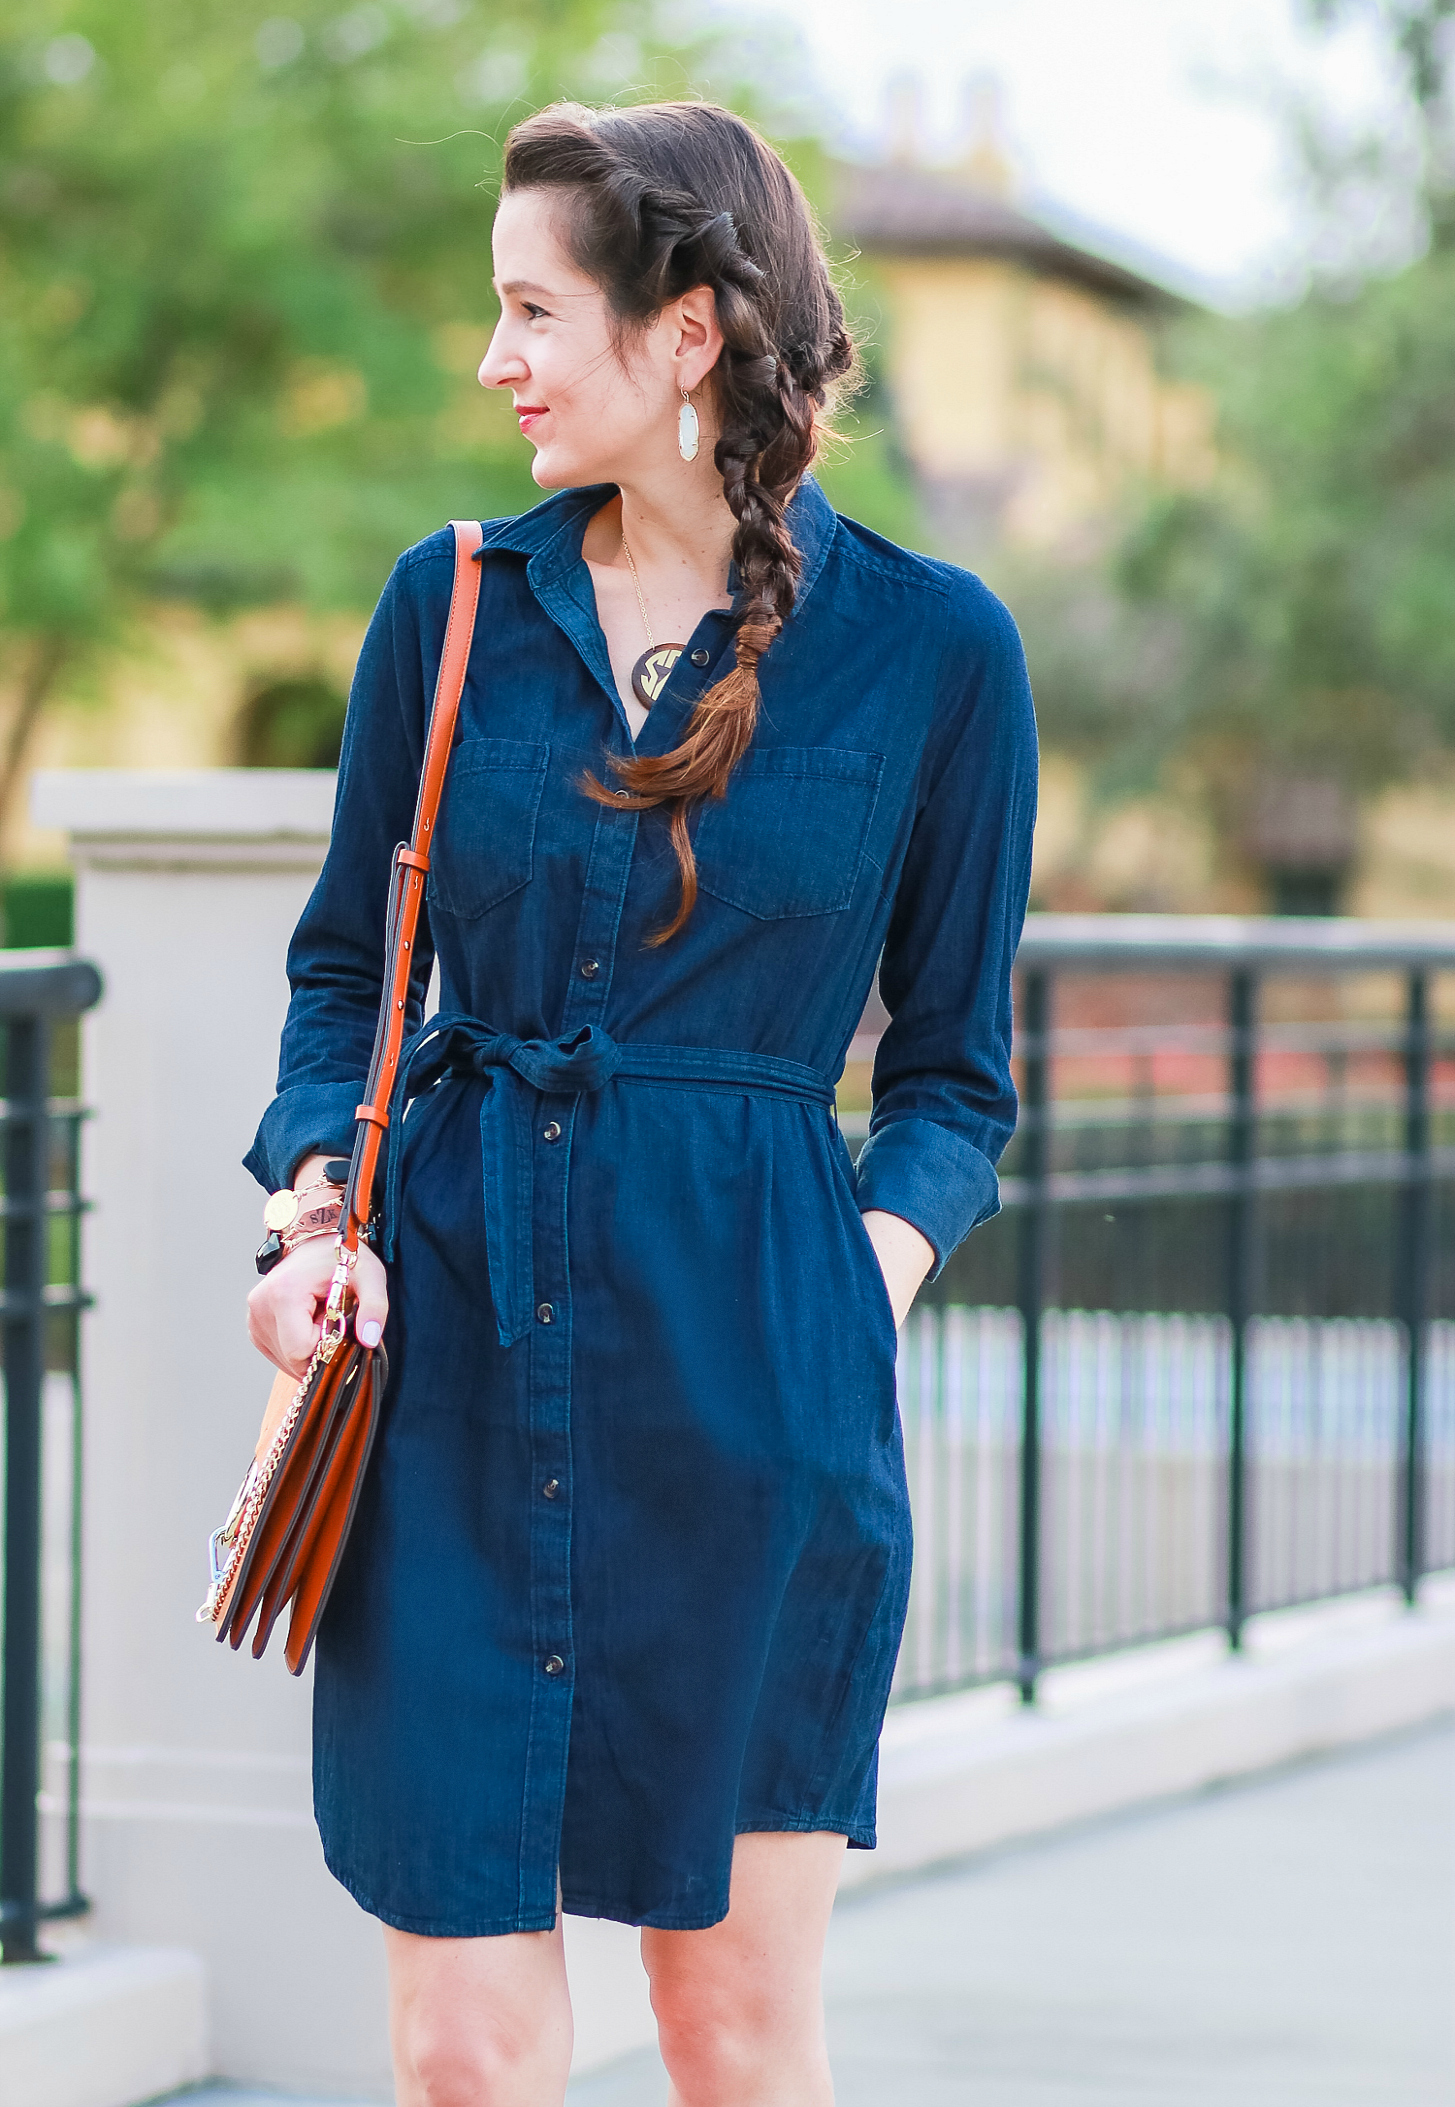 Cute casual tailgating outfit and easy side braid hairstyle | Twisted side braid hair tutorial | Target denim shirt dress with cognac booties, a Chleo Faye lookalike bag, and monogrammed jewelry | Fall Hairstyle to Try: Simple Twisted Side Braid from Hair Cuttery by southern blogger Stephanie Ziajka from Diary of a Debutante